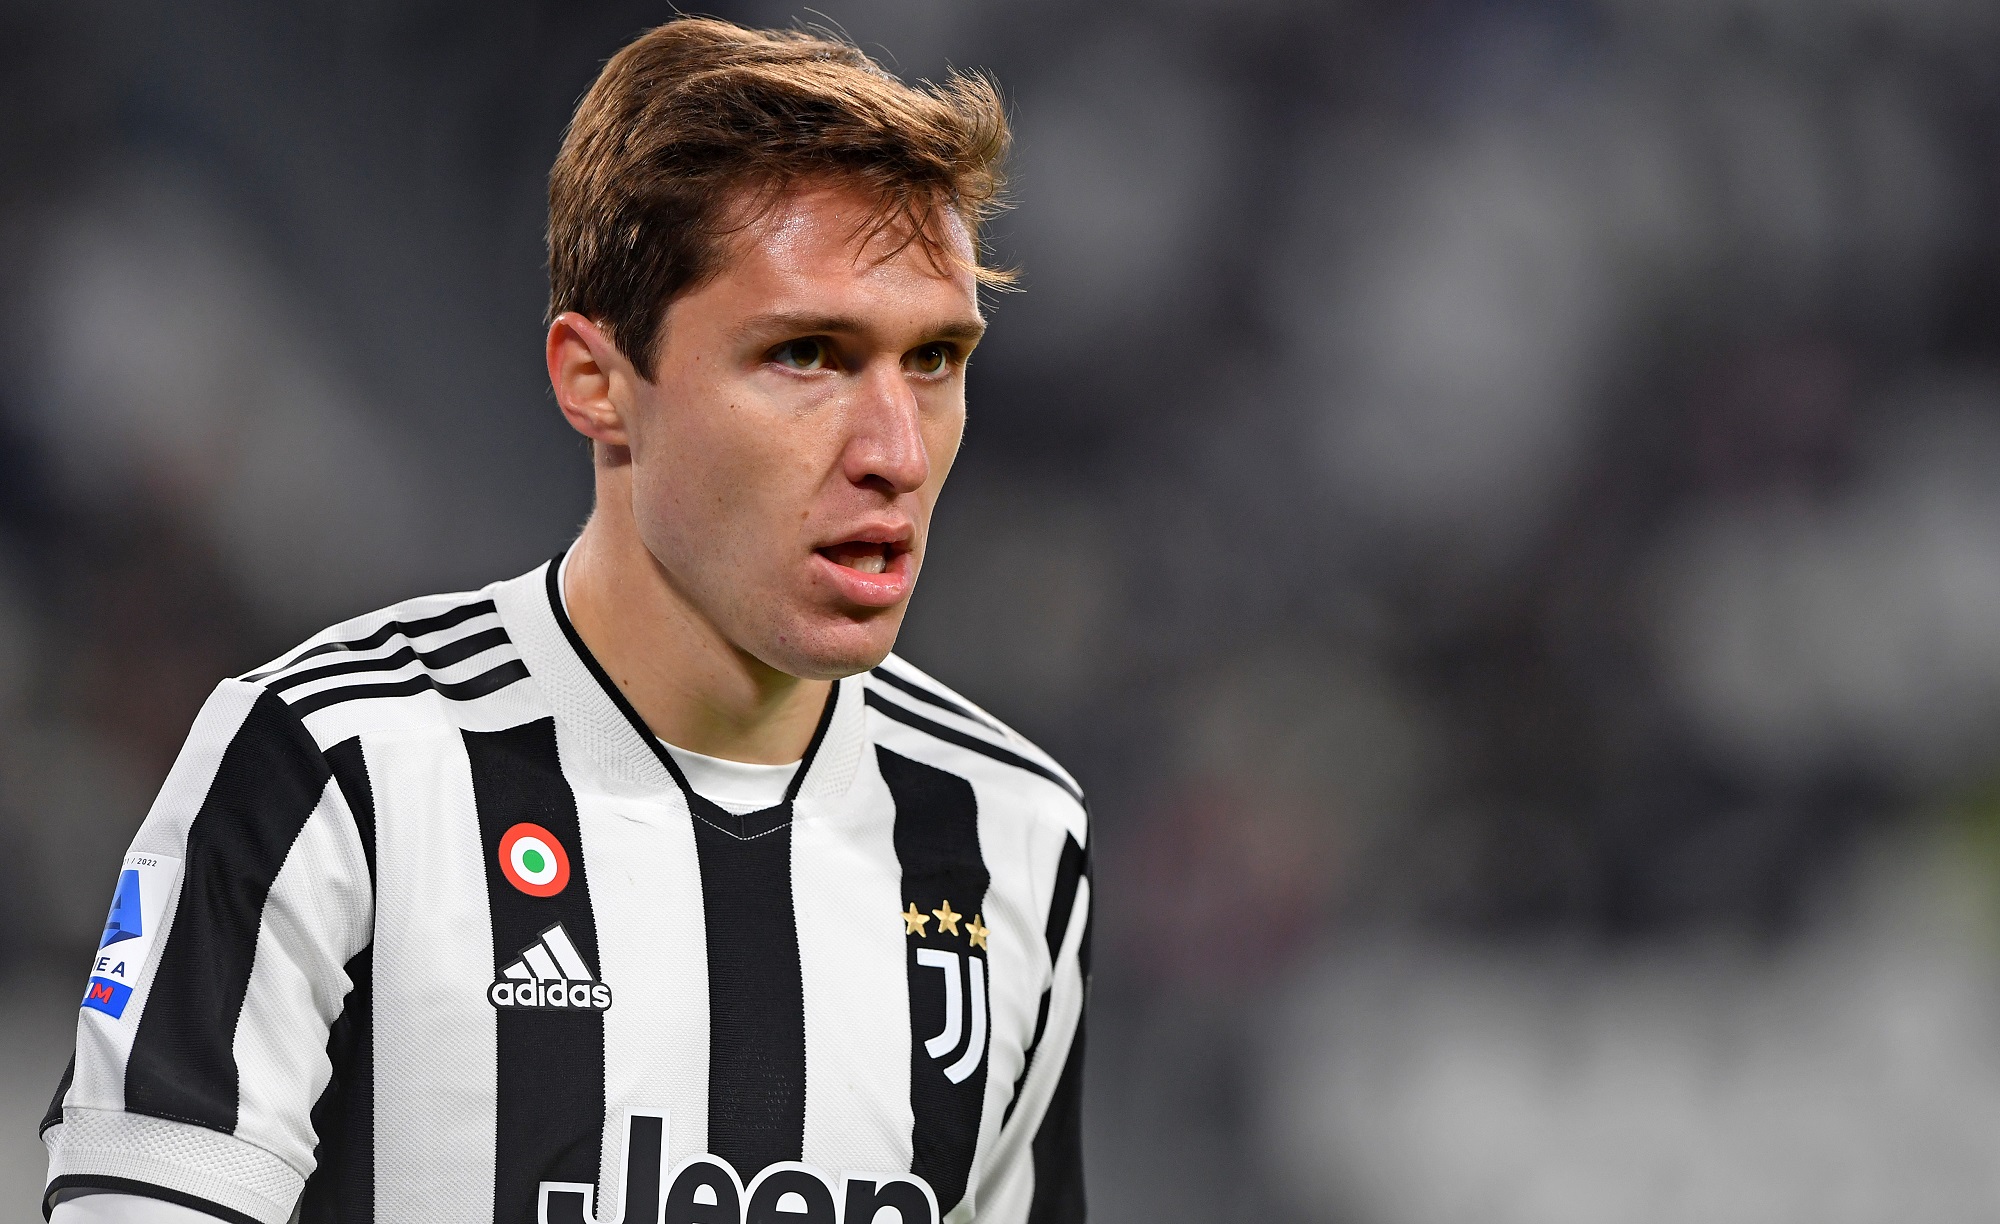 The future of Federico Chiesa at Juventus hangs in the balance due to a poor second half of the season and a short-term contract, as it runs out in 2025.